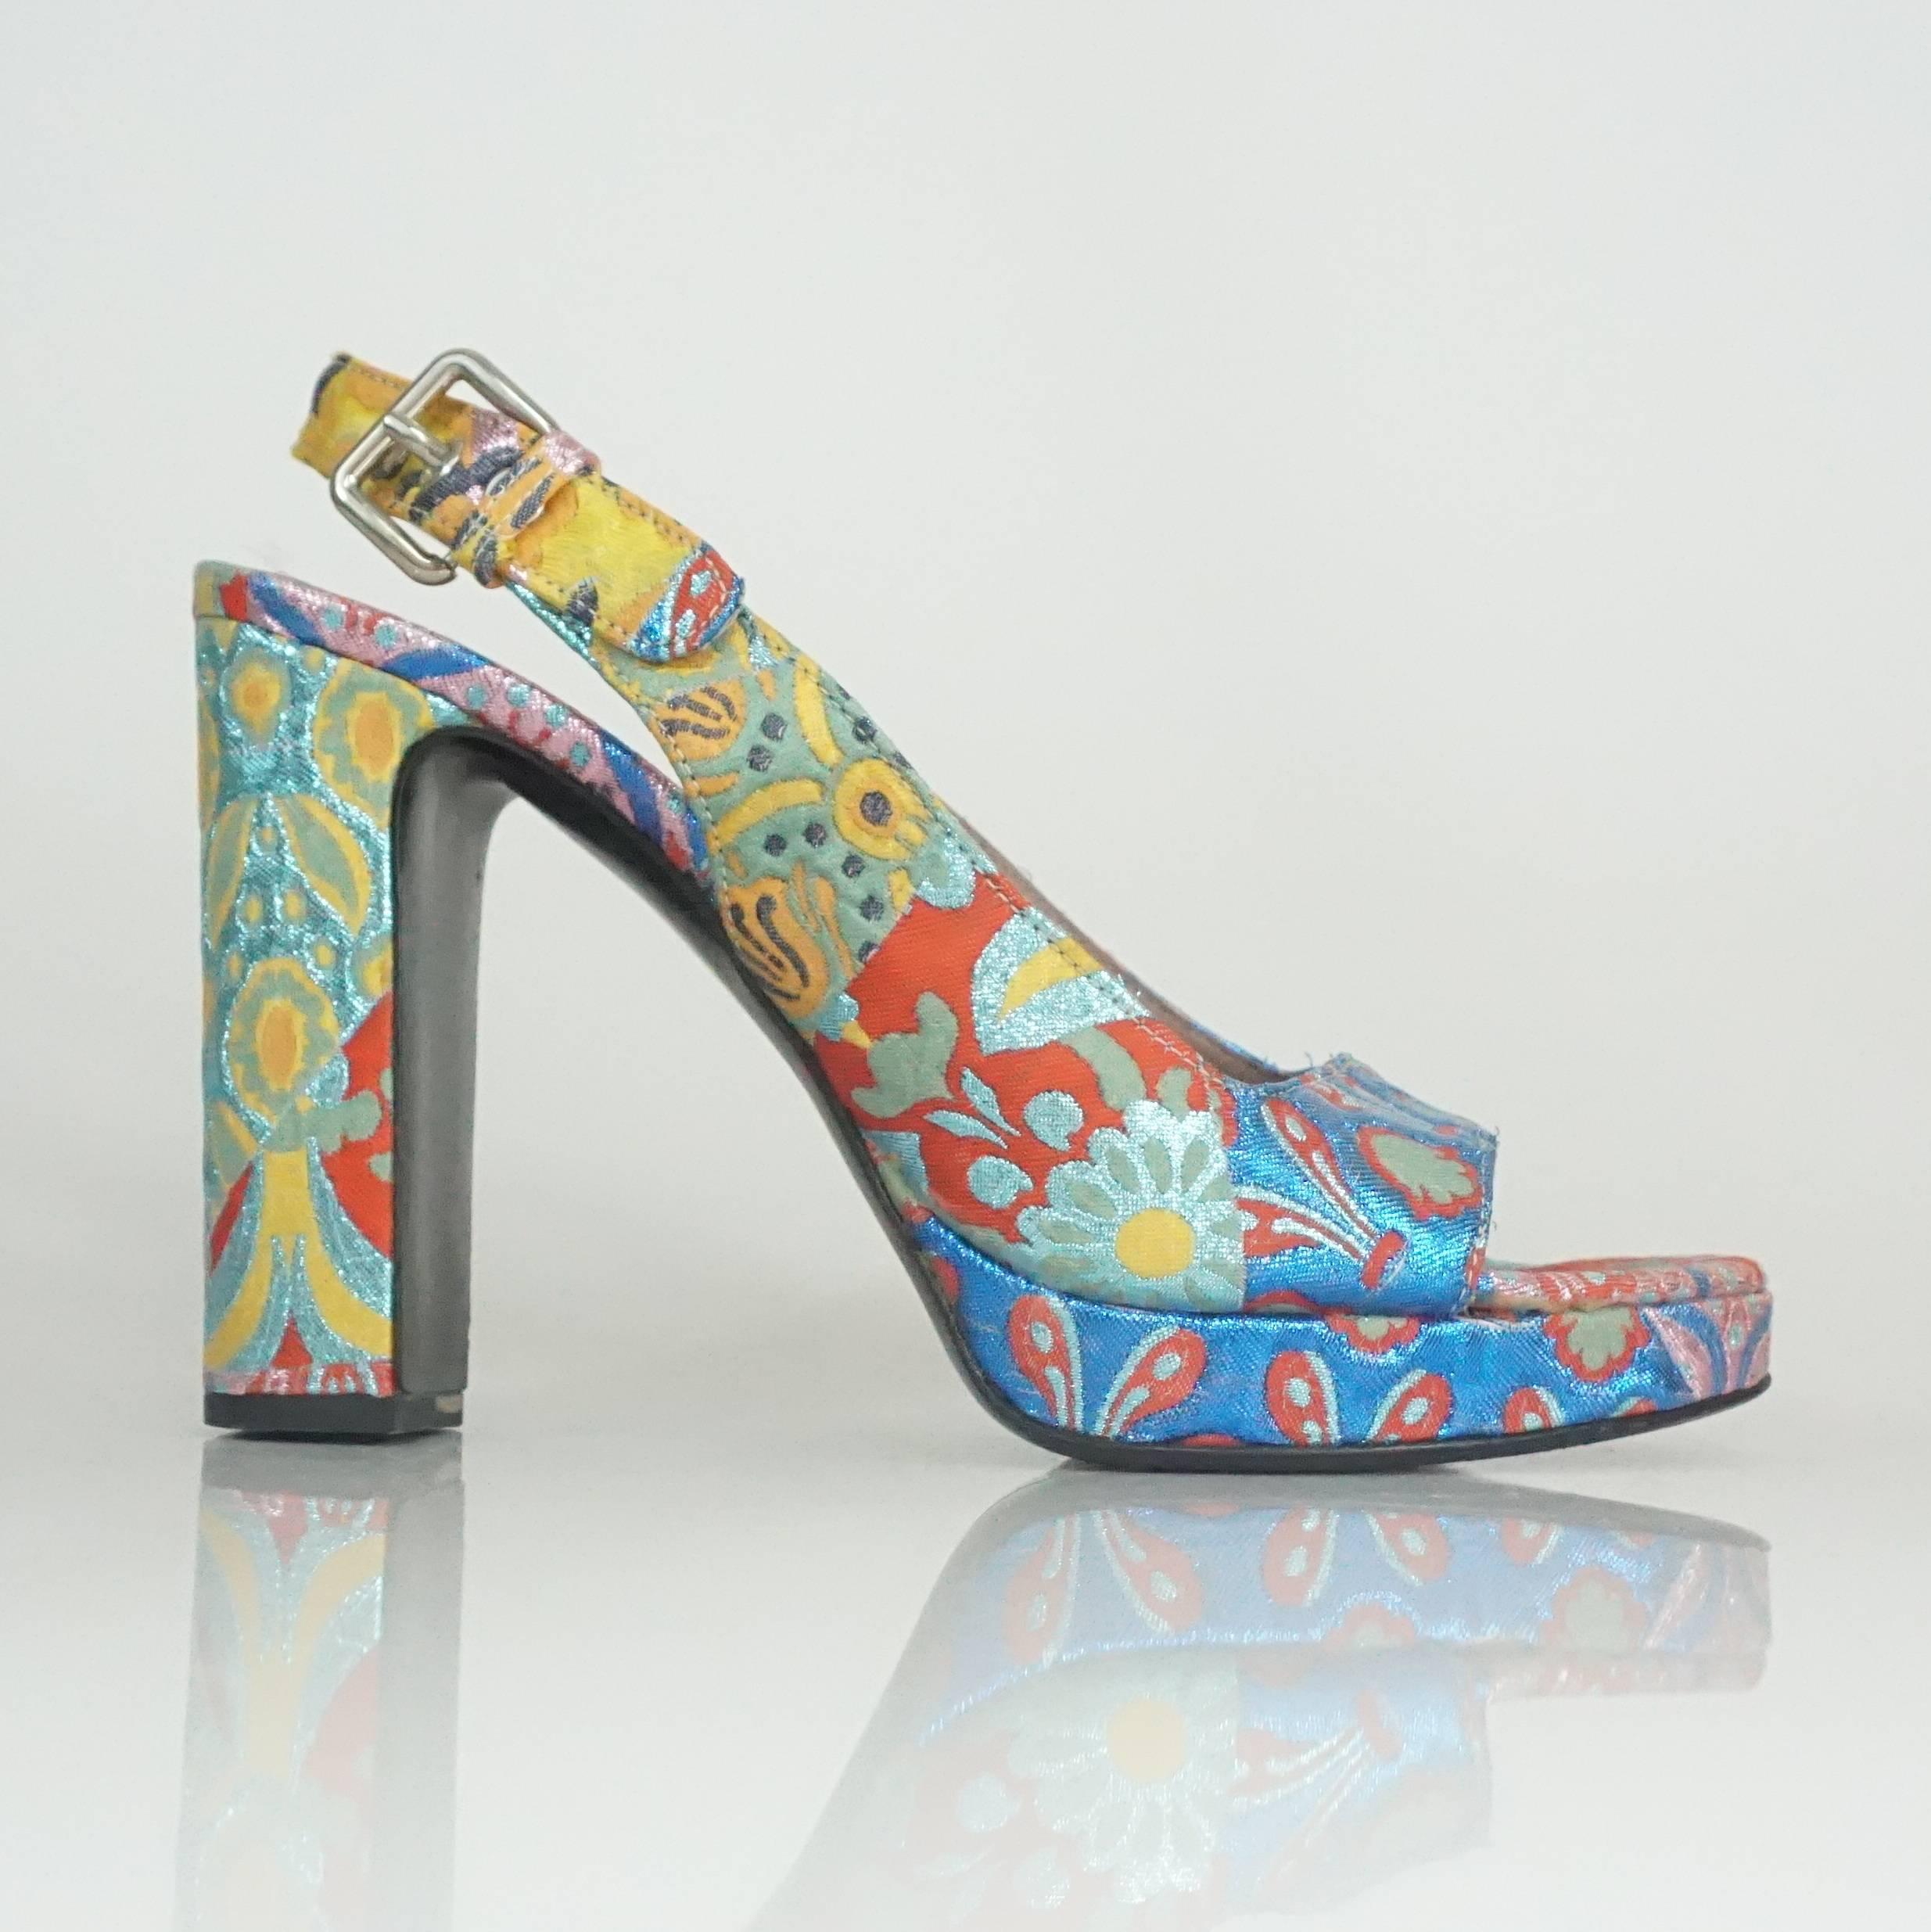 Miu Miu Multi Colored Patterned Brocade Open Toe Slingback - 40.5 - SHW. These fun shoes have a chunky heel and multiple colors such as blue, yellow, and coral done in a metallic brocade fabric. The slingback strap has a silver buckle. They are in